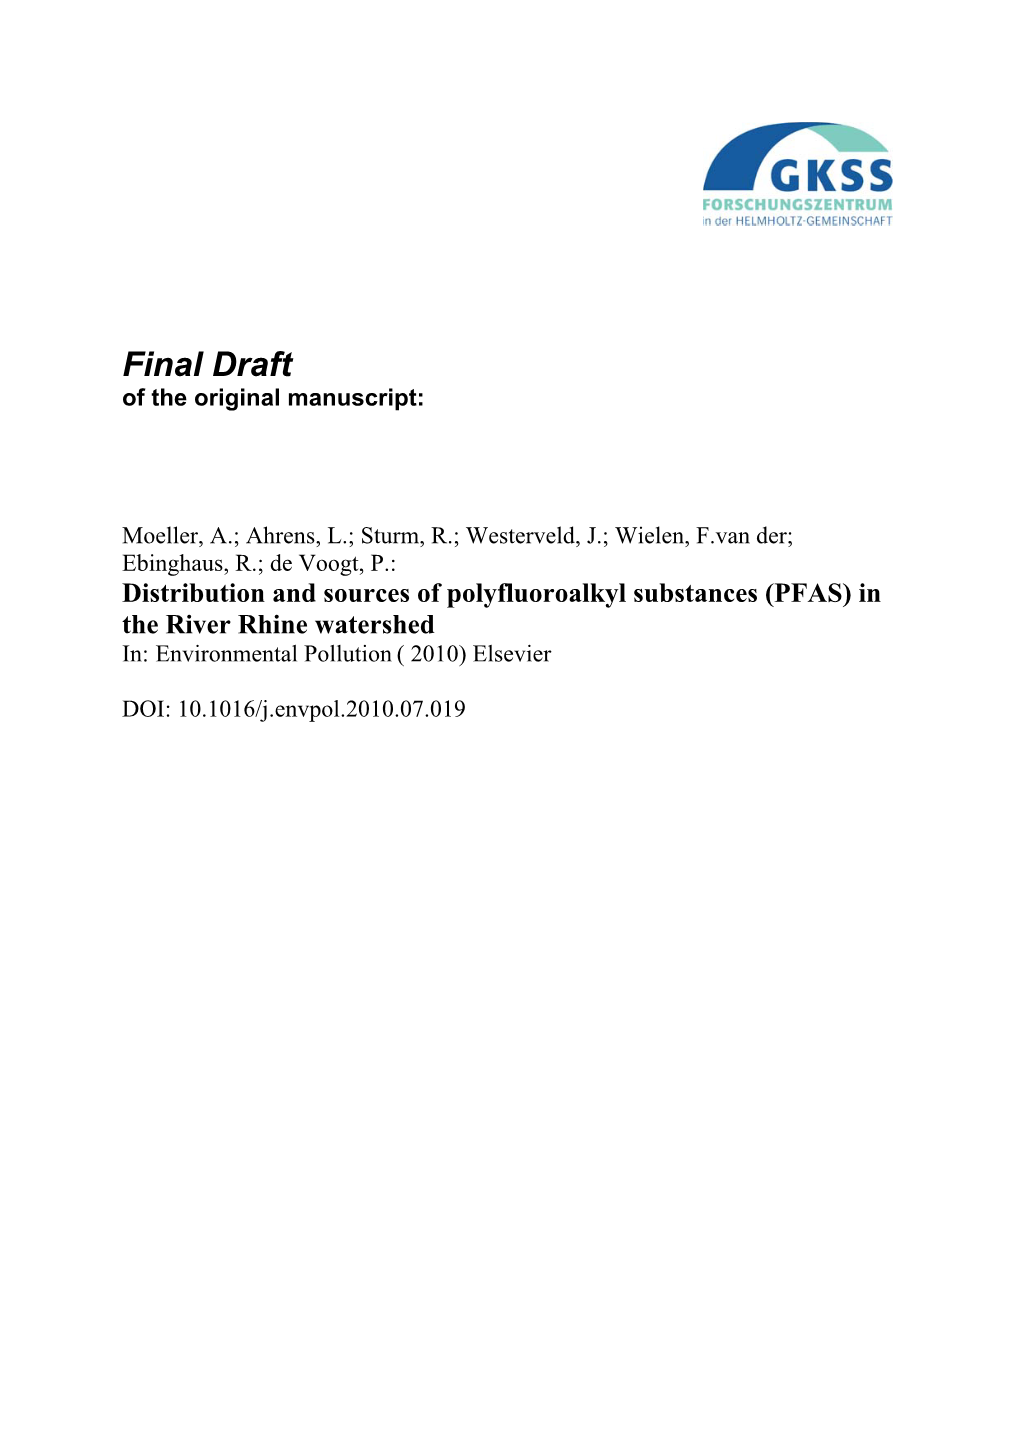 (PFAS) in the River Rhine Watershed In: Environmental Pollution ( 2010) Elsevier